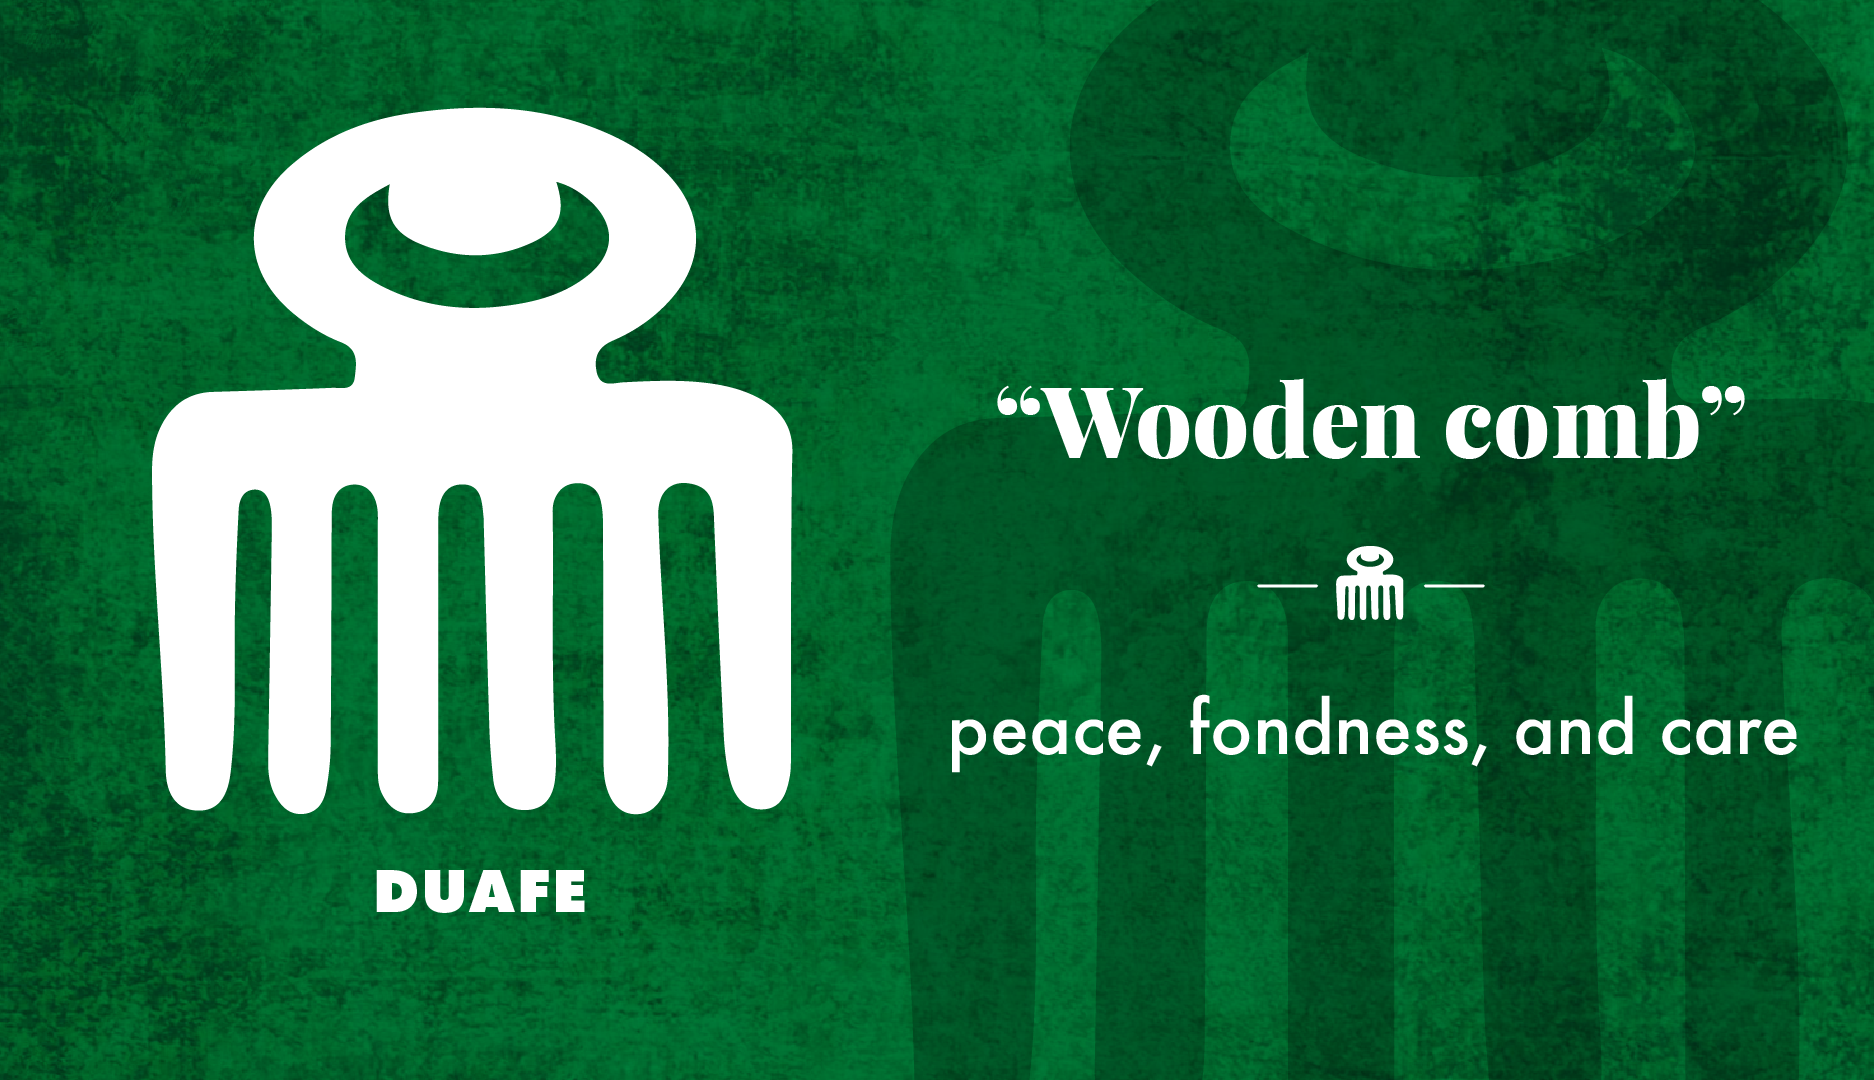 Adinkra symbol "DUAFE" meaning "Wooden Comb" peace, fondness, and care